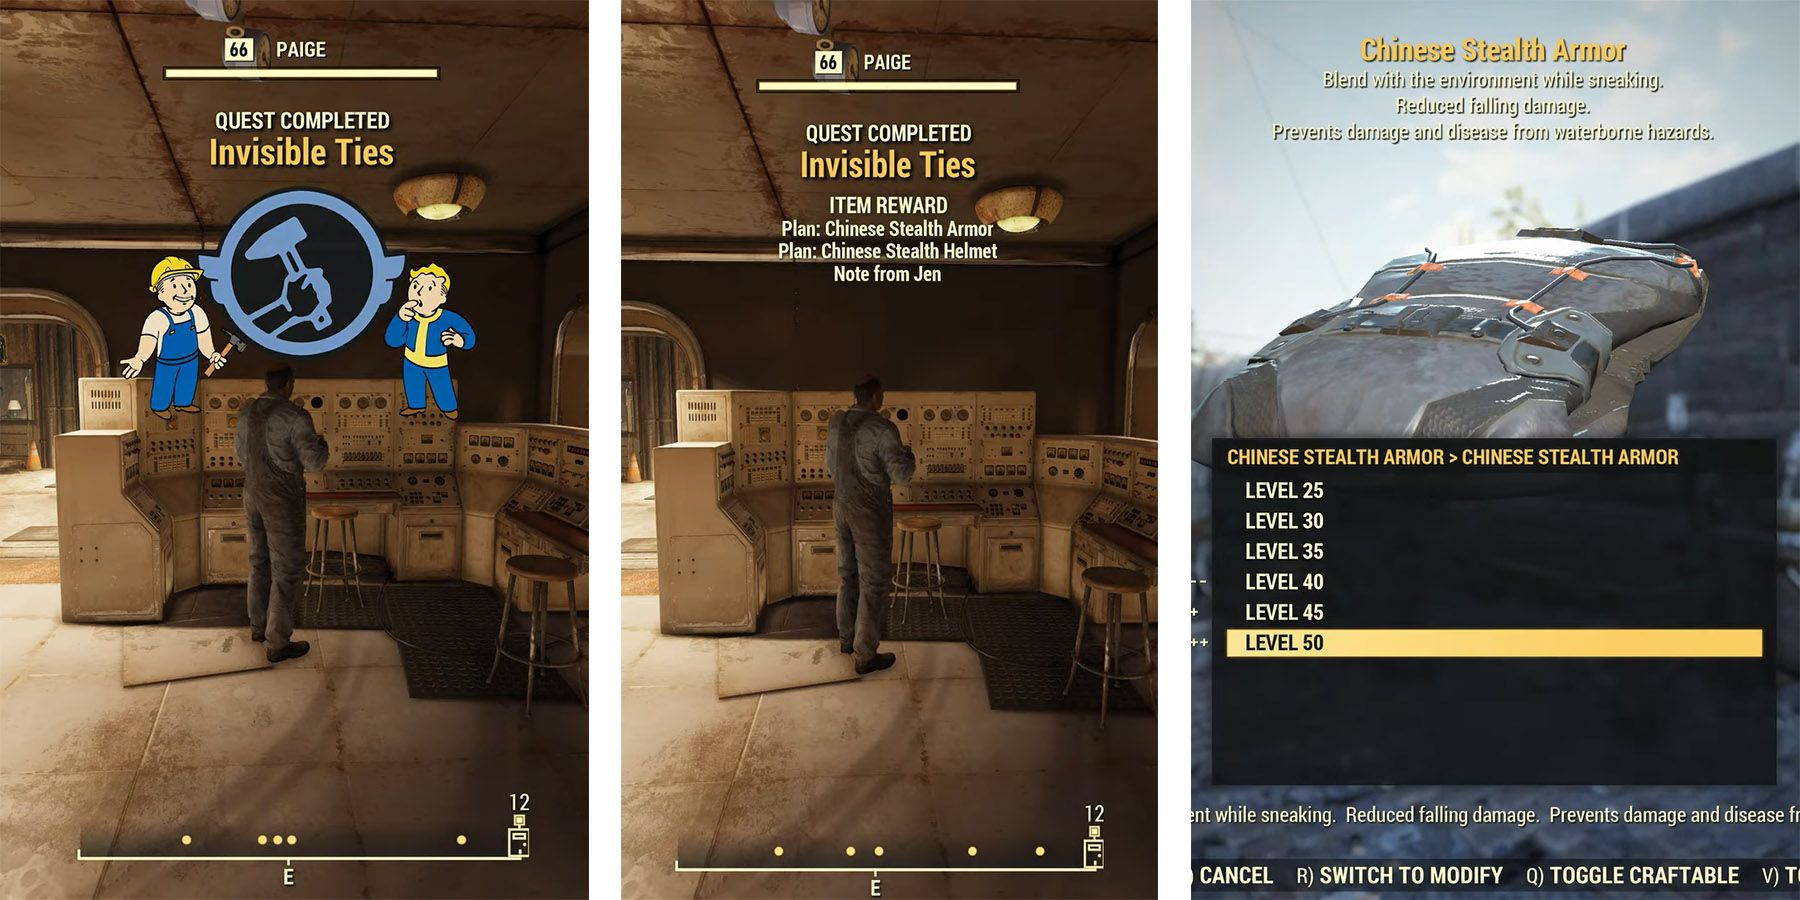 image showing the steps to get the chinese stealth armor in fallout 76.